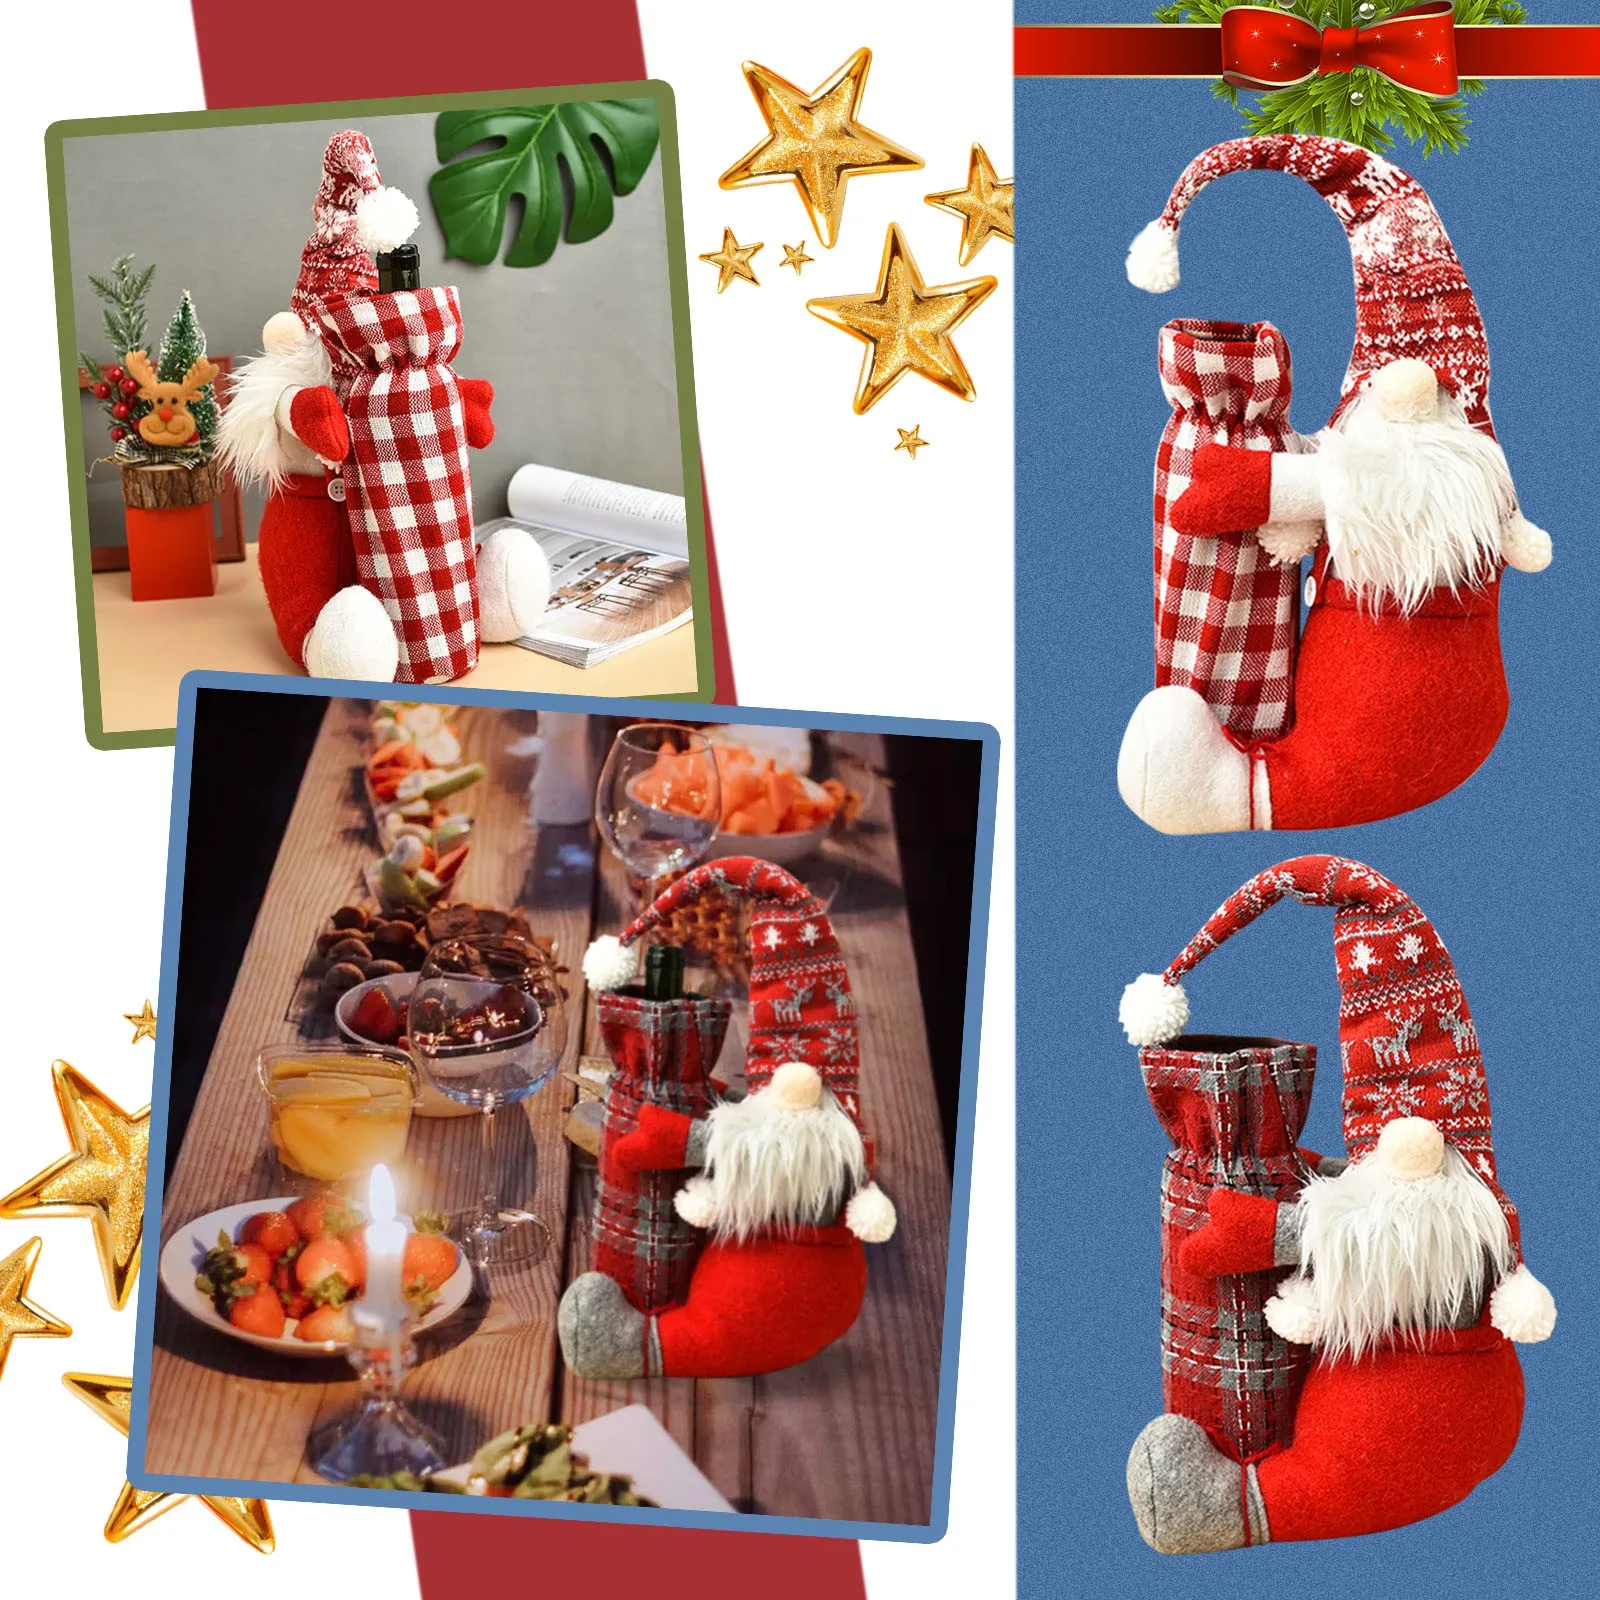 callm Christmas Wine Bottle Decor Gray Red Wine Bottle Cover Bags Faceless Dolls Wine Bottles Set Embroidery Old Mans Toys Christmas Decoration Home Party Santa Claus Christmas 